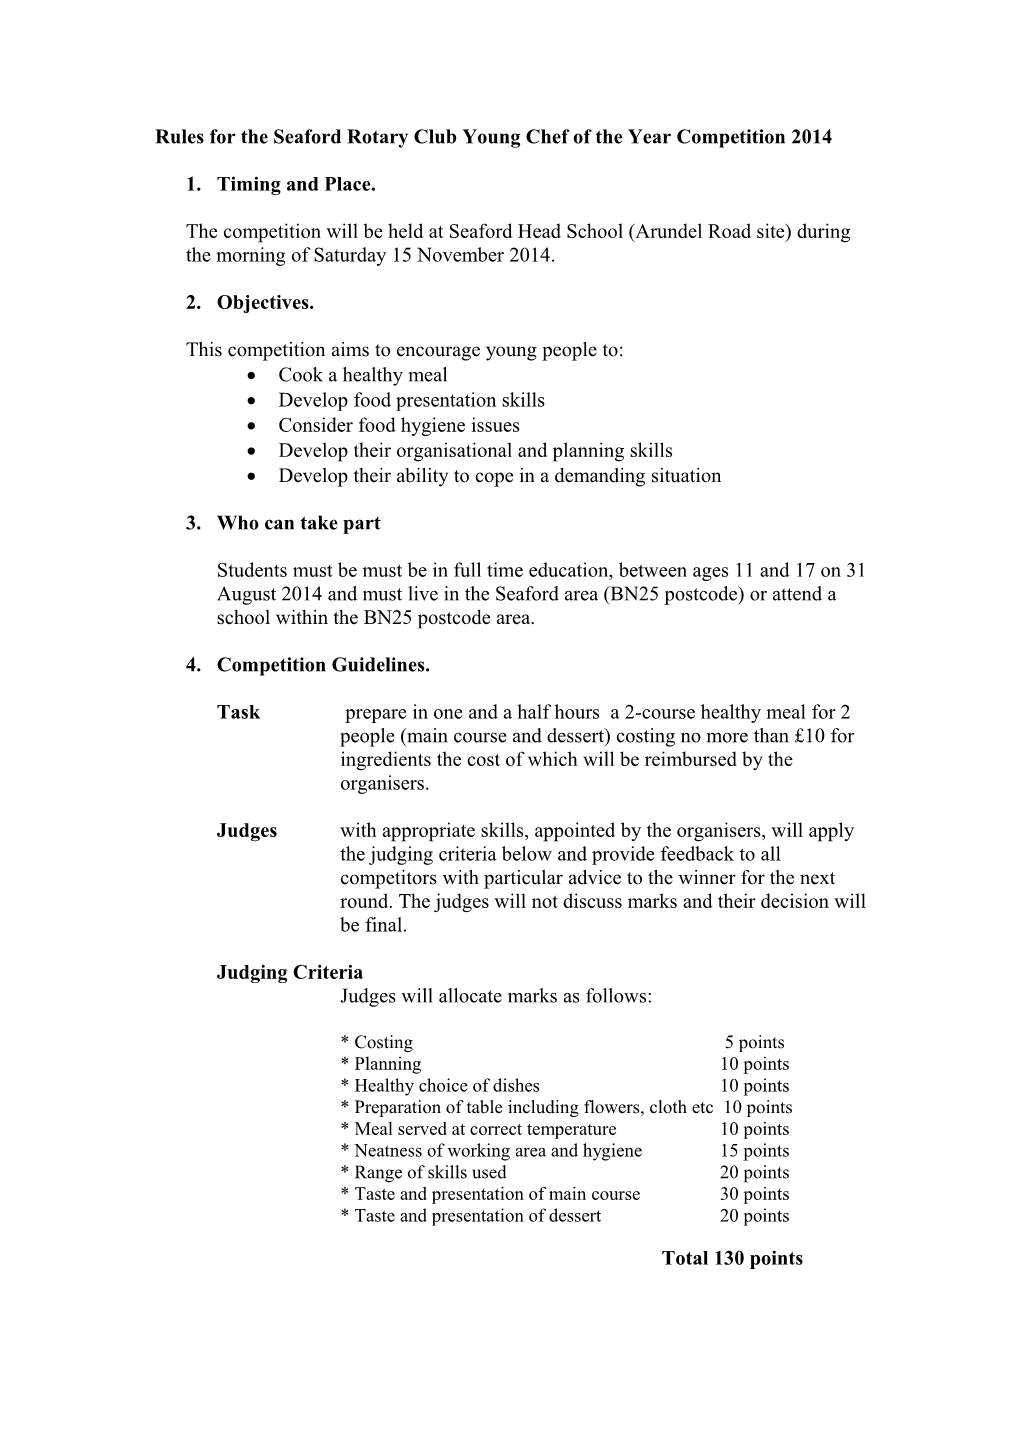 Rules for the Seaford Rotary Club Young Chef of the Year Competition 2012